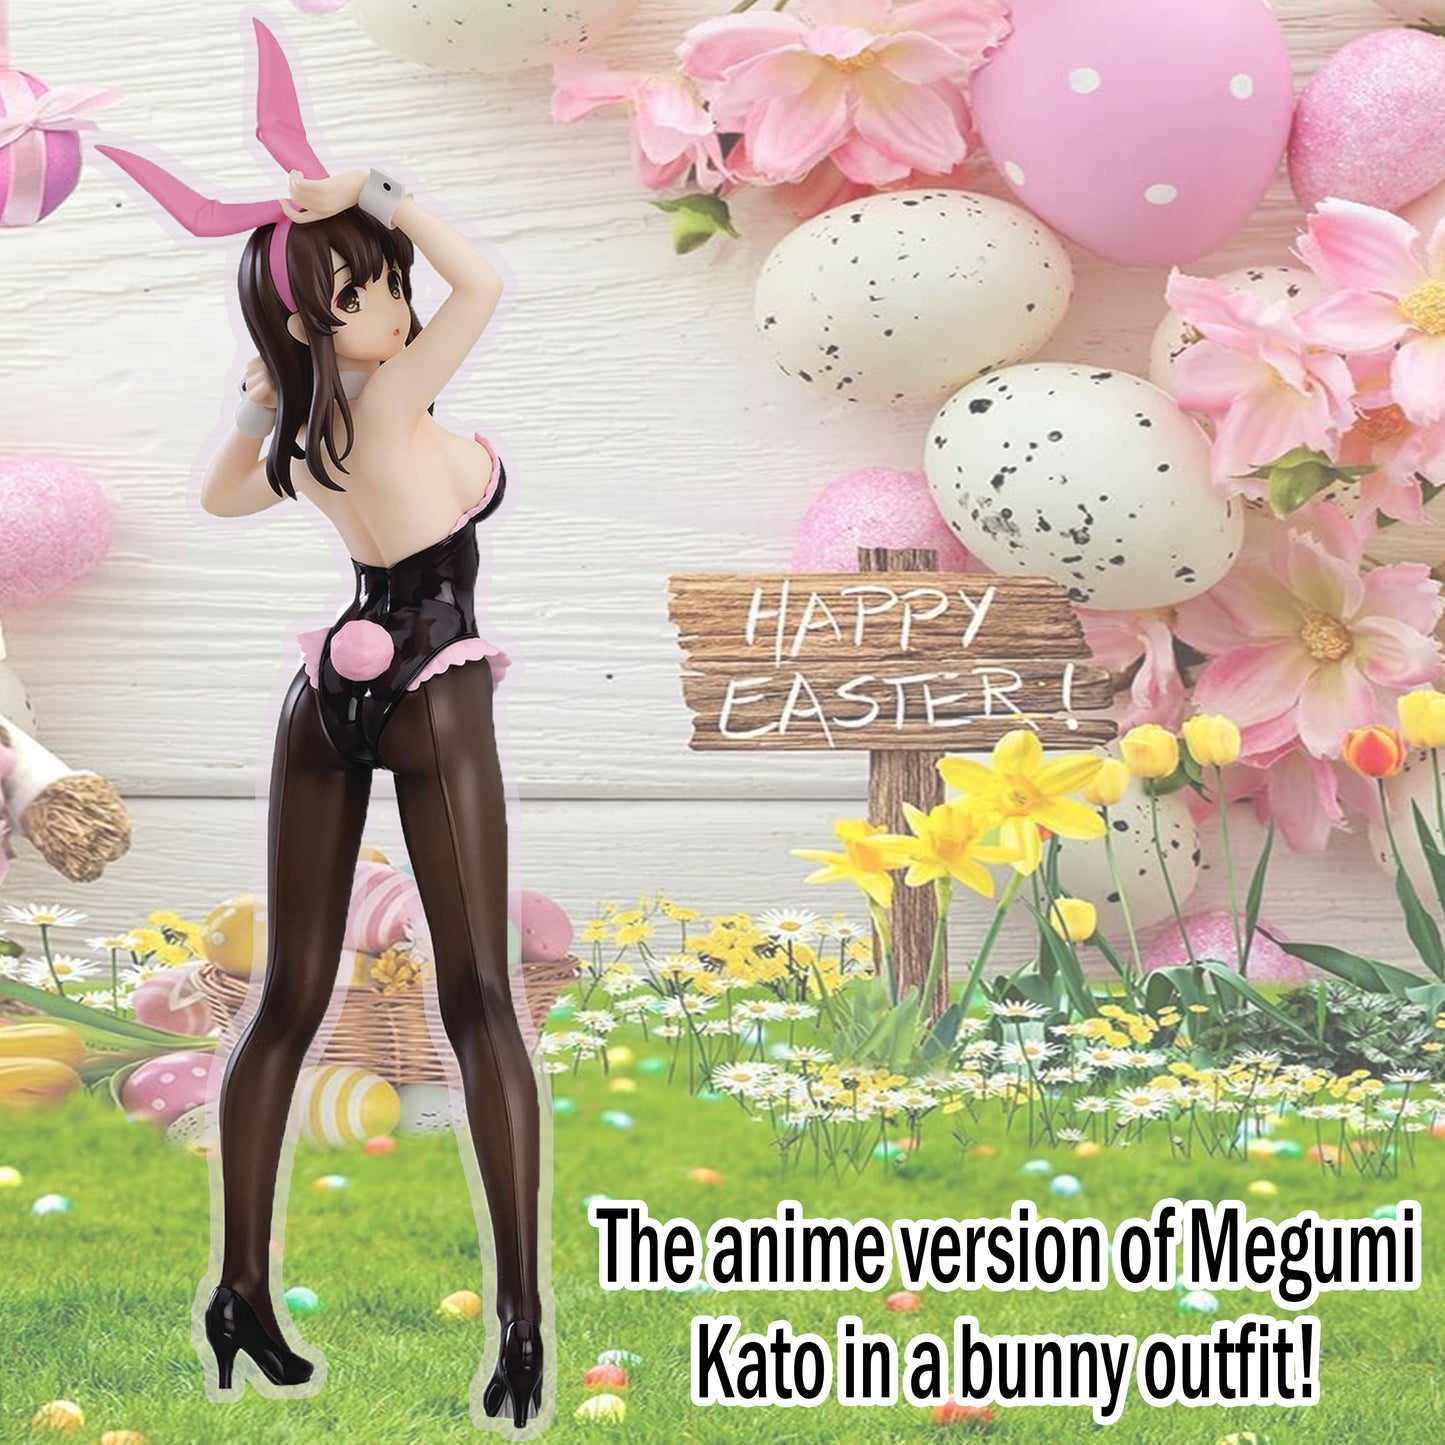 Anime POP UP PARADE figure Megumi Kato in a bunny outfit